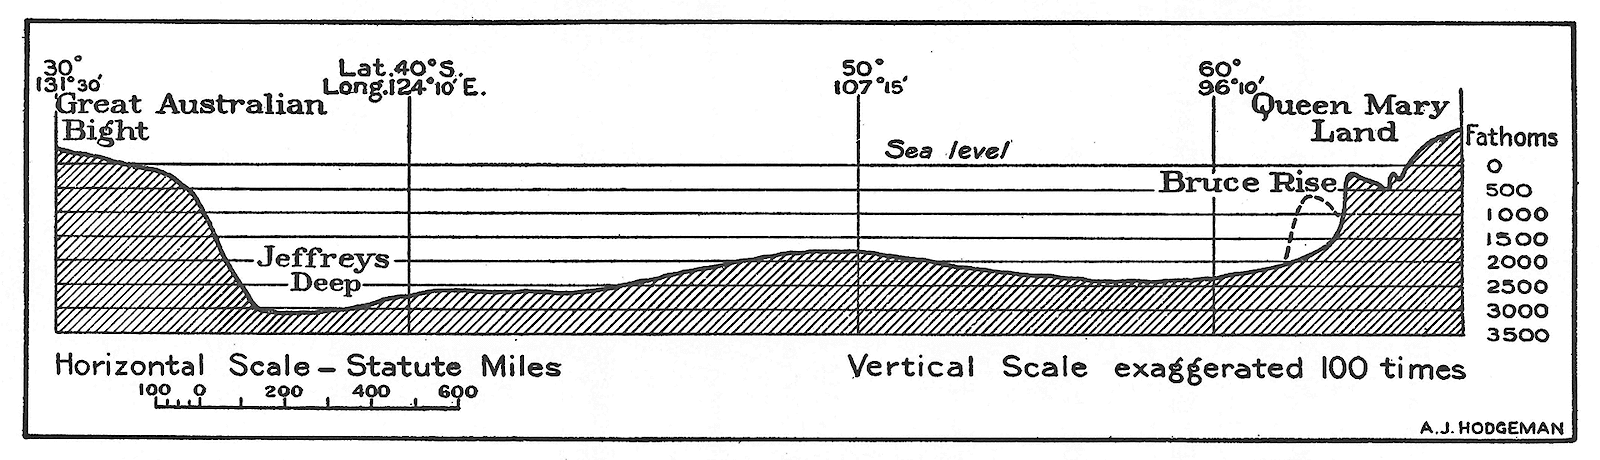 A section diagram of the floor of the Southern Ocean between Western Australia and Queen Mary Land.